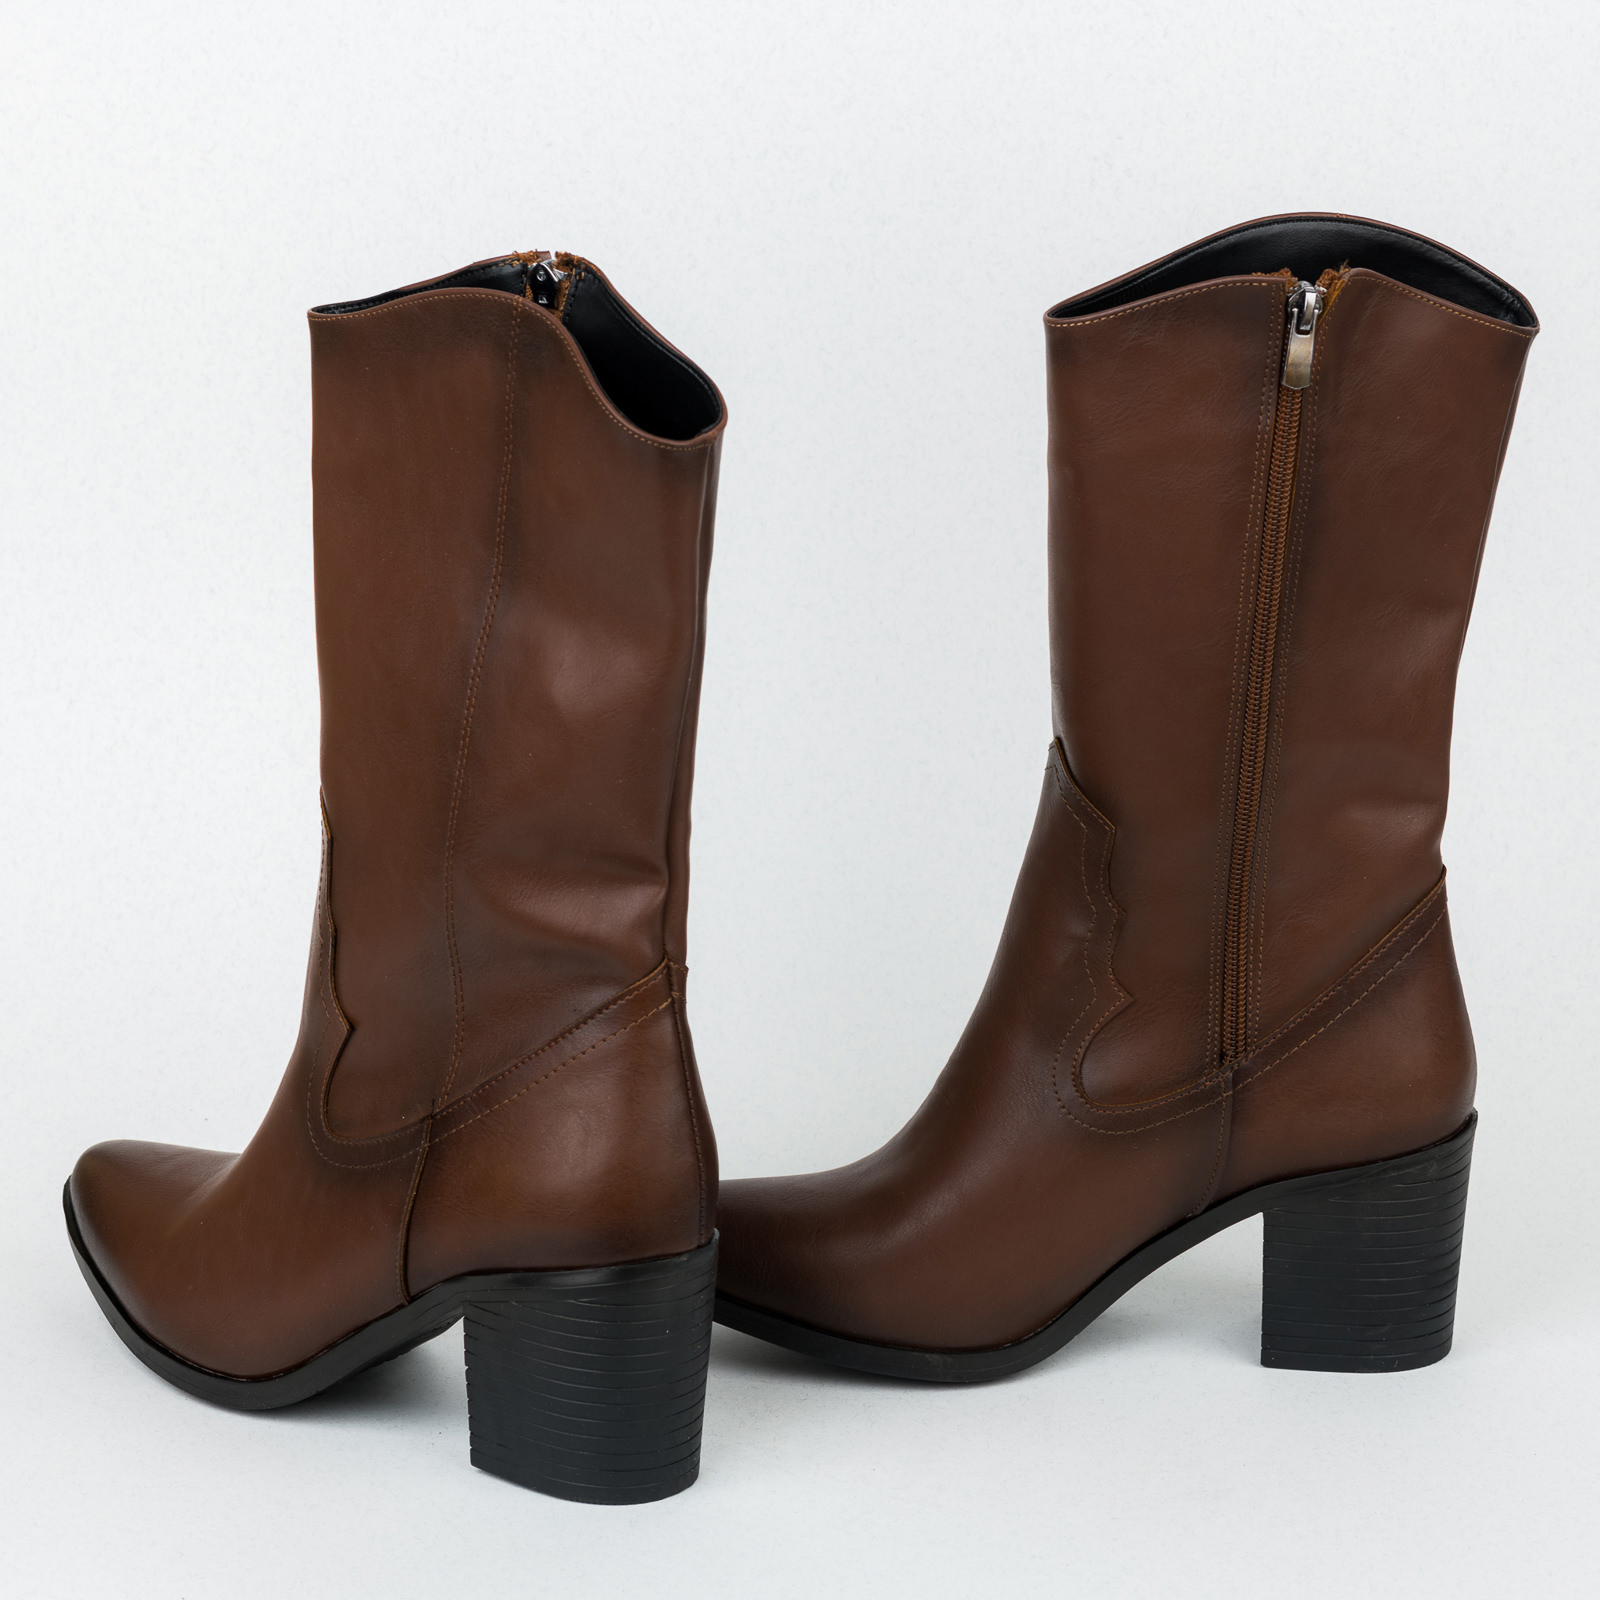 Women ankle boots B429 - BROWN